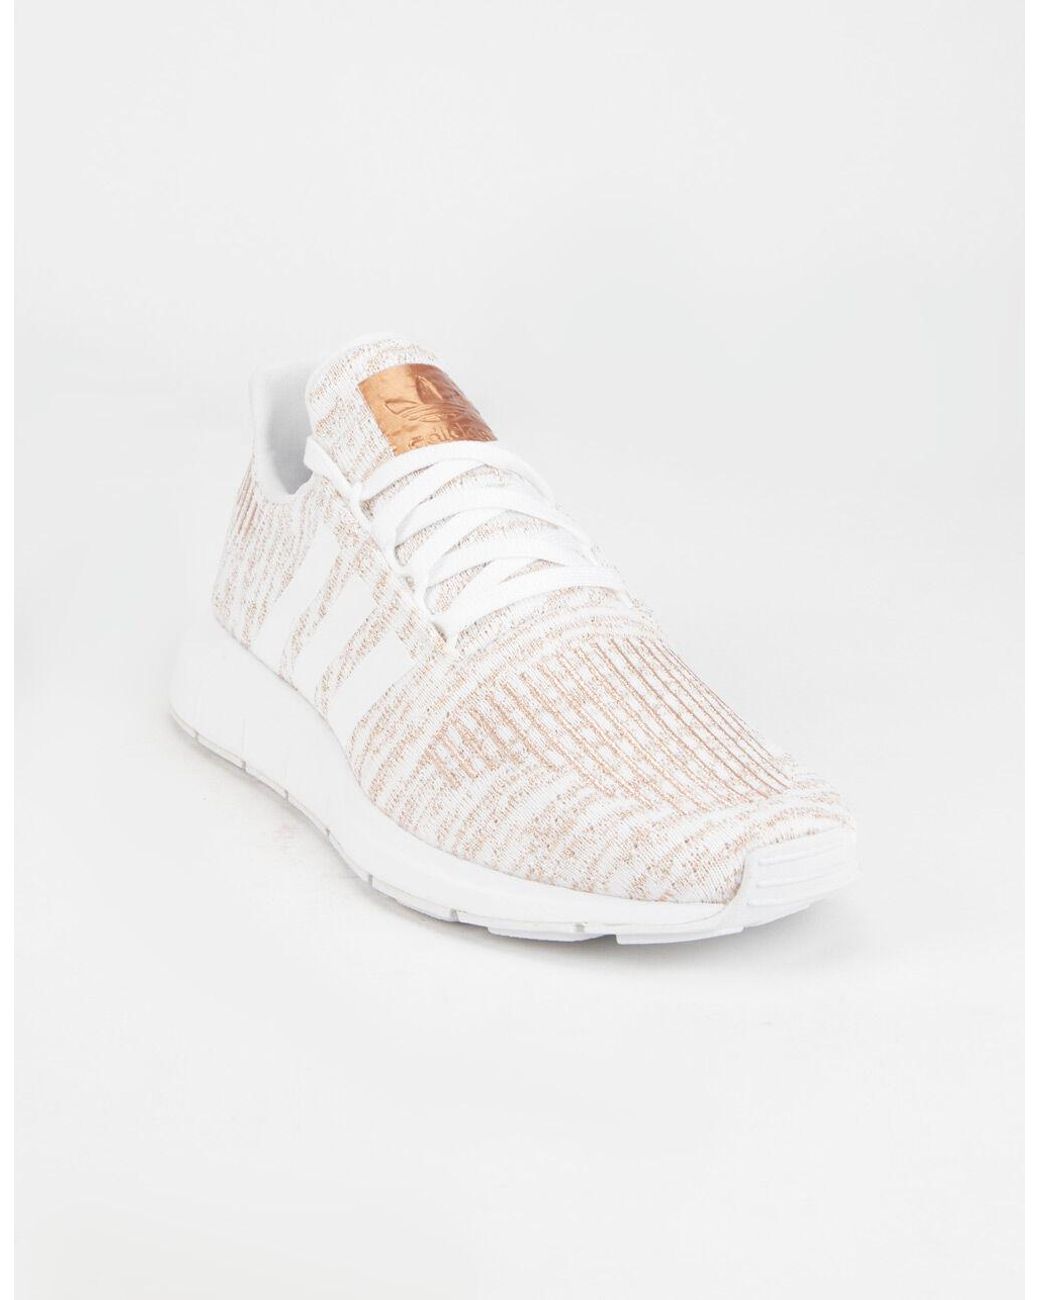 adidas white shoes with rose gold stripes